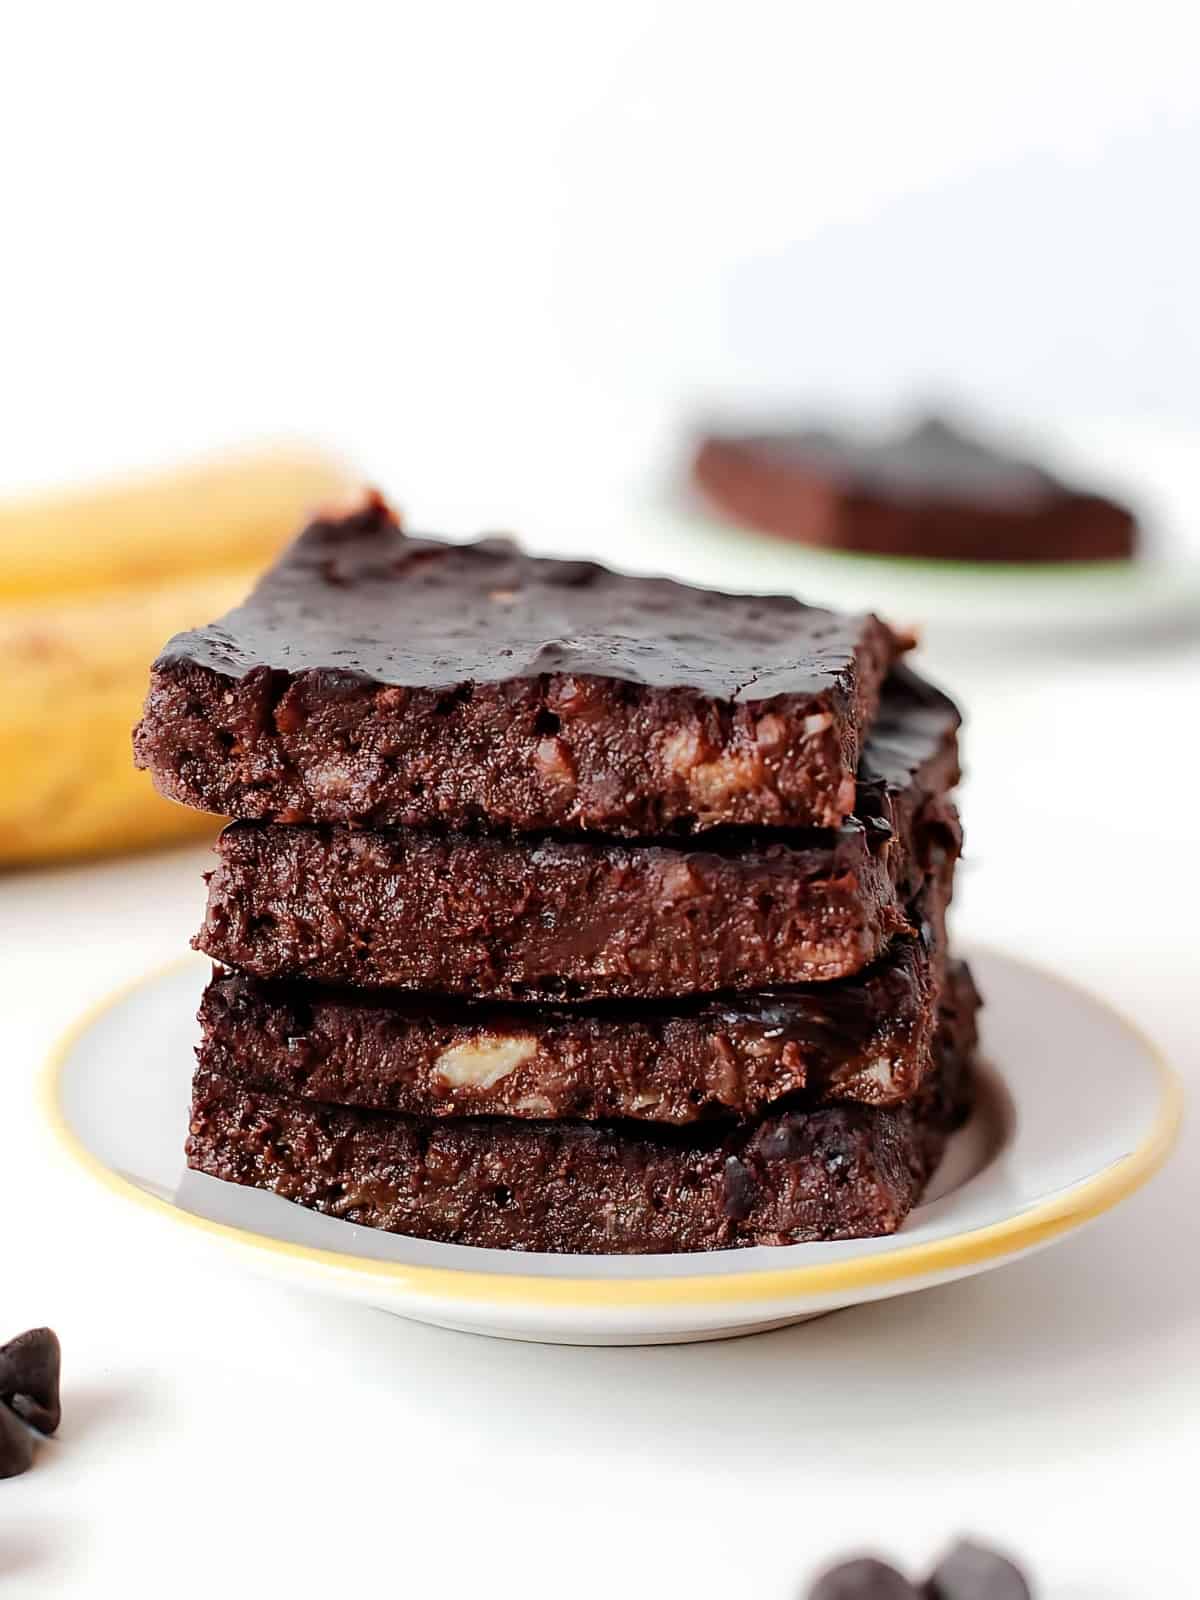 Stacked chocolate banana brownies on a small plate.